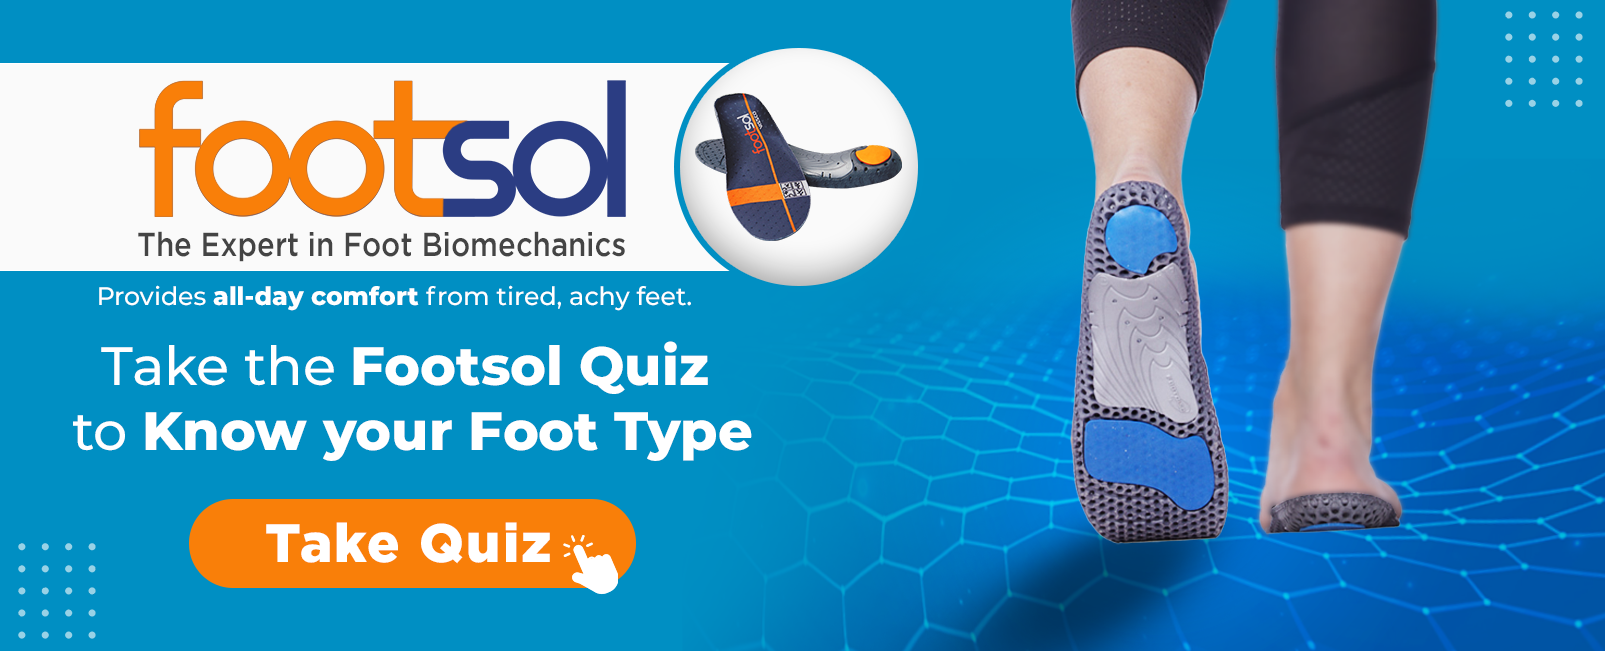 Insole for Plantar Fasciitis Foot Pain - Footsol